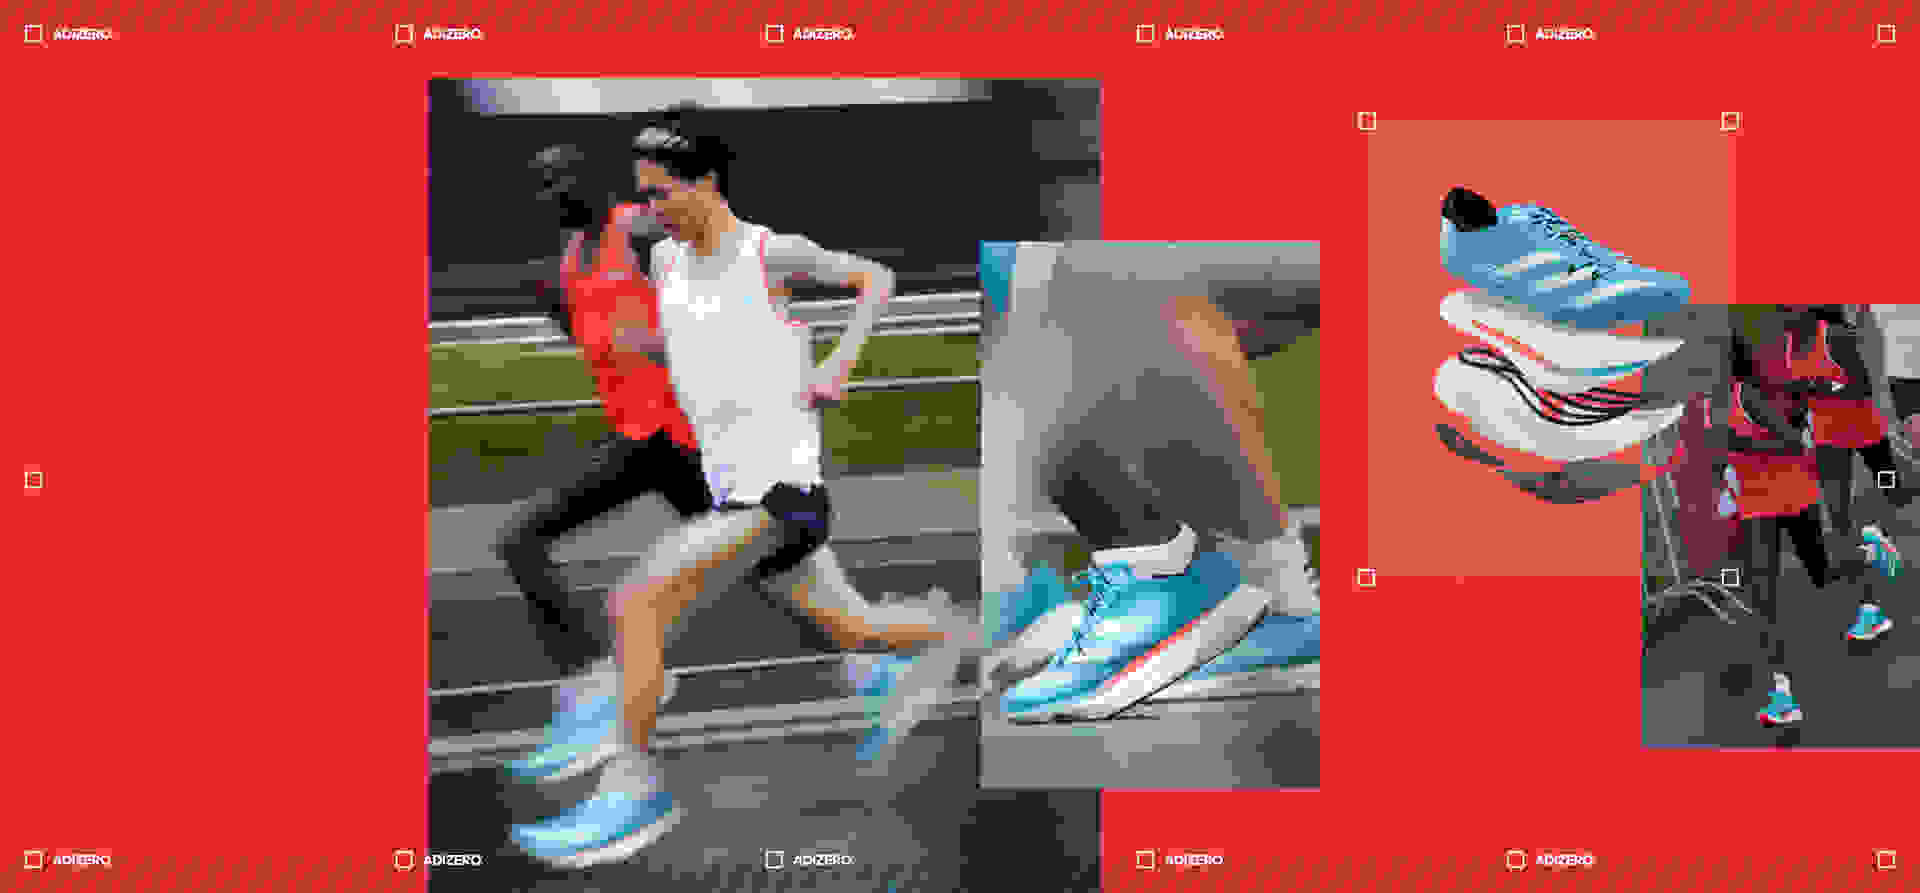 Montage of runners in motion wearing Adizero Pro 3, close-up on running shoe, cross-section of the layers of foam in Adizero Pro 3, Peres Jepchirchir wearing Adizero while racing.